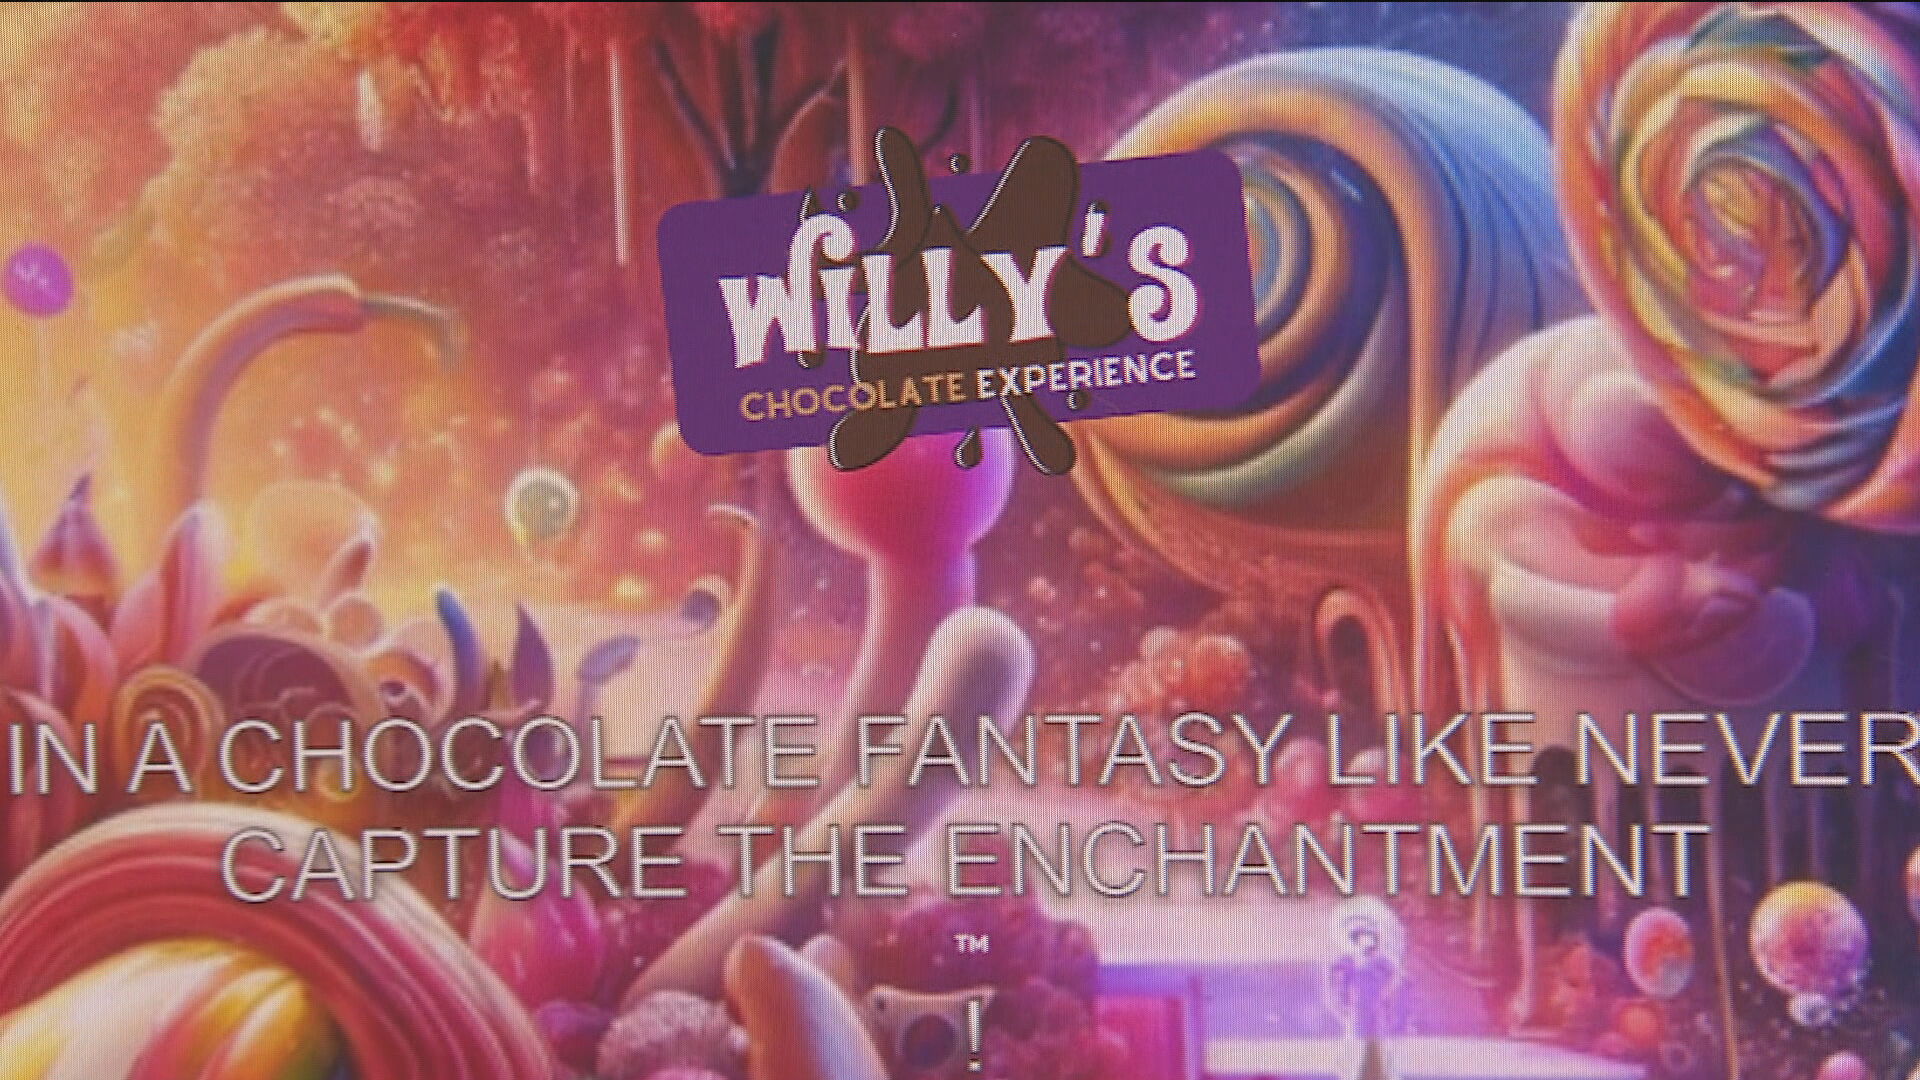 The Willy's Chocolate Experience website.